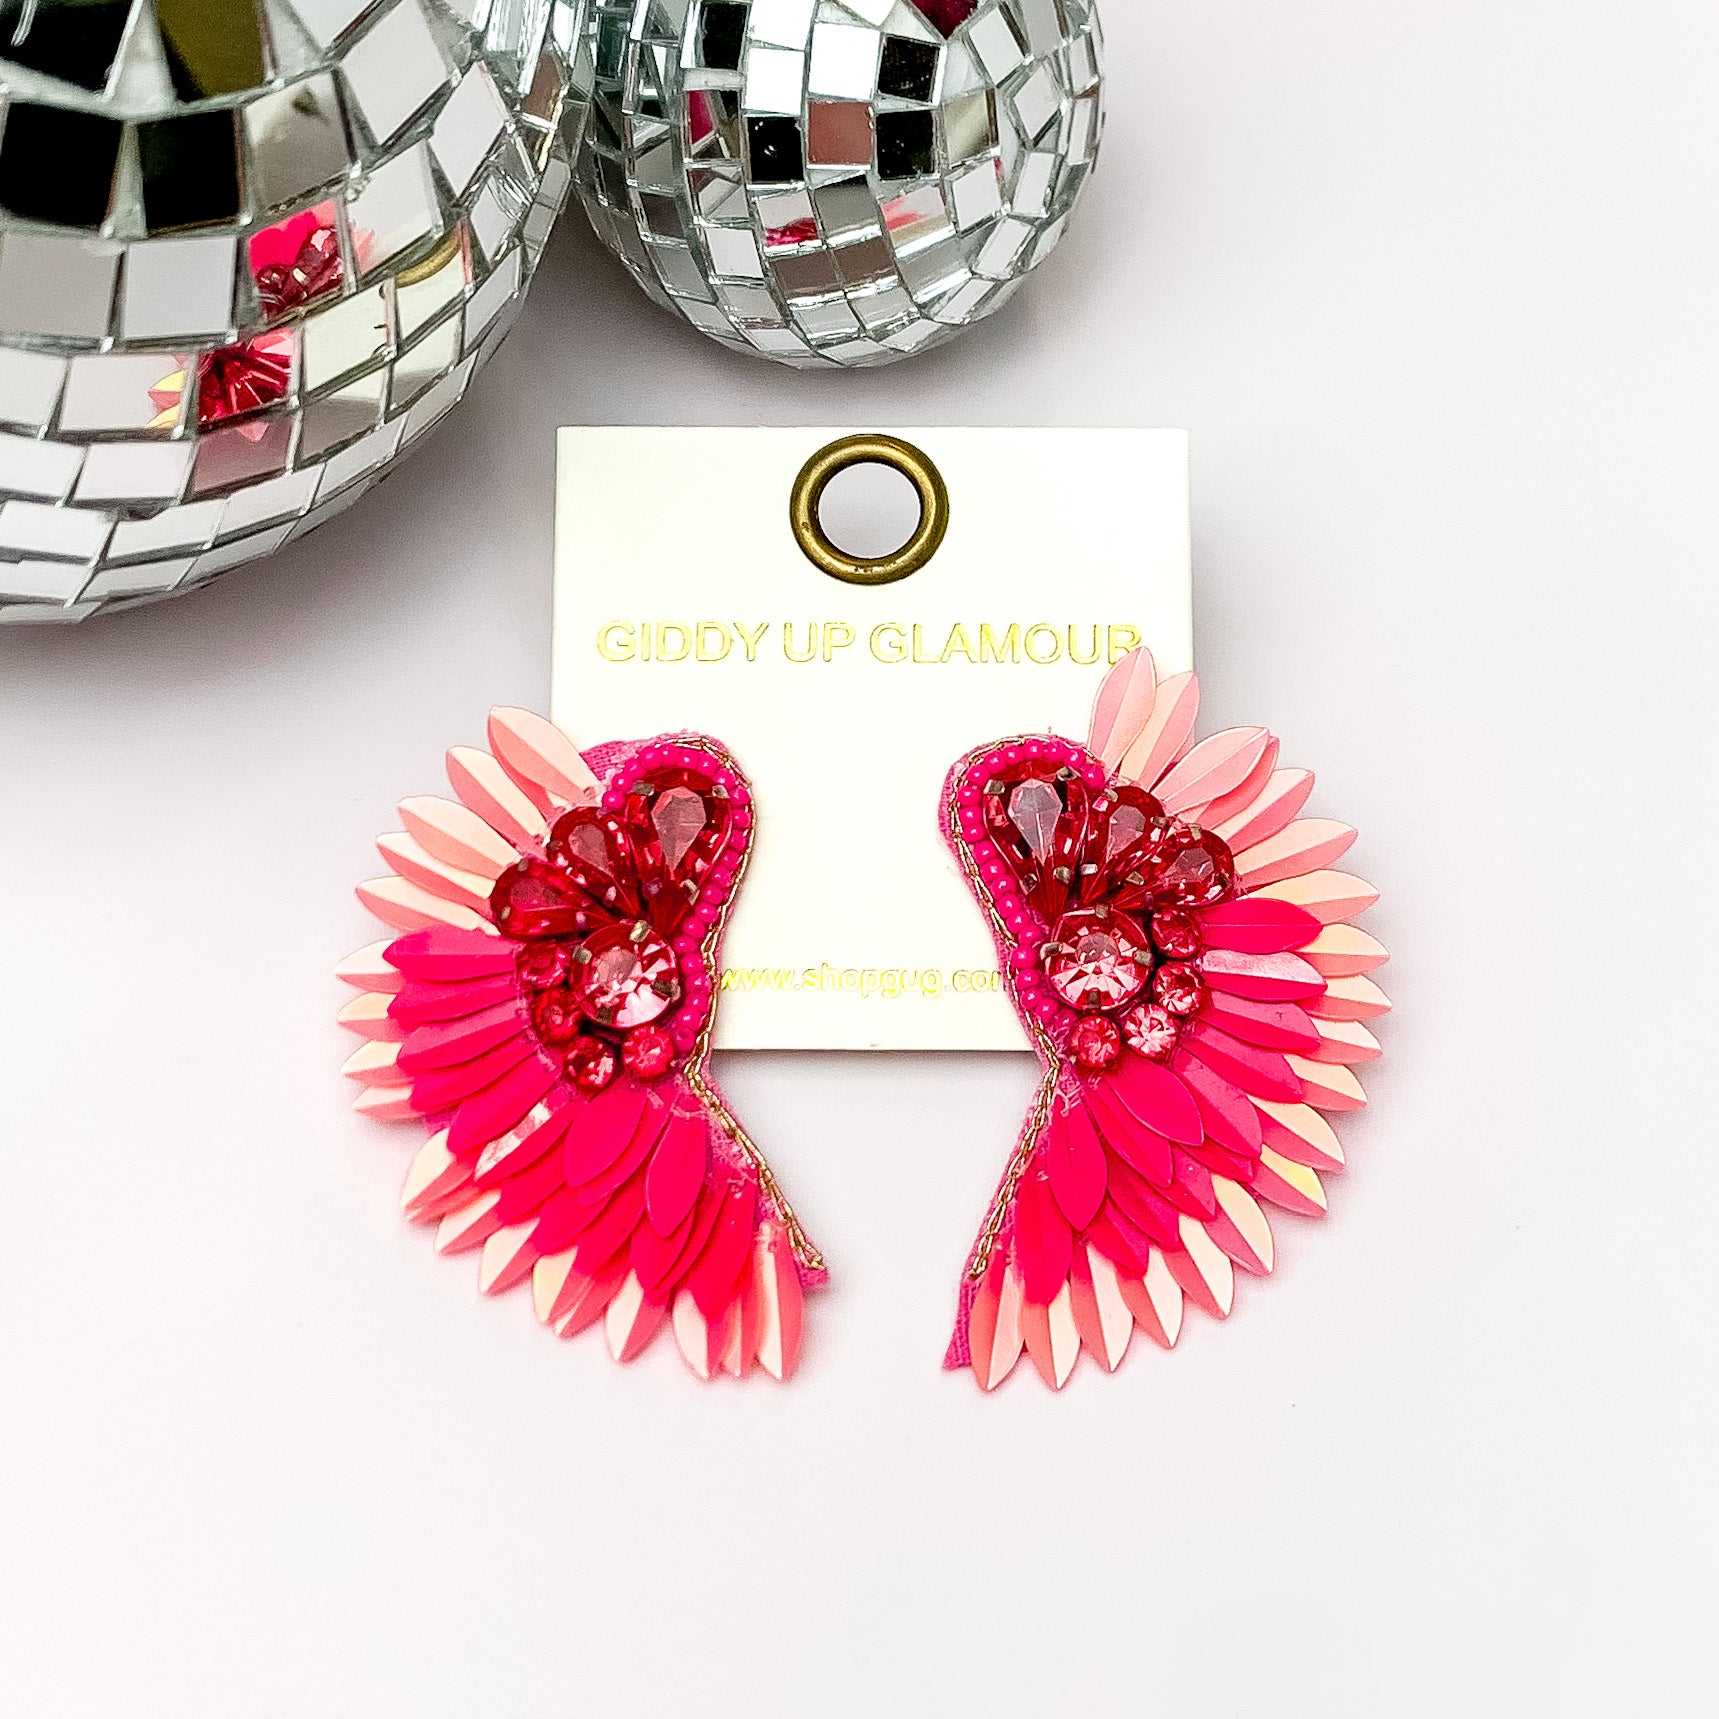 Saw An Angel Sequin Earrings with Clear Crystals in Pink. Pictured on a white background with disco balls in the top left.